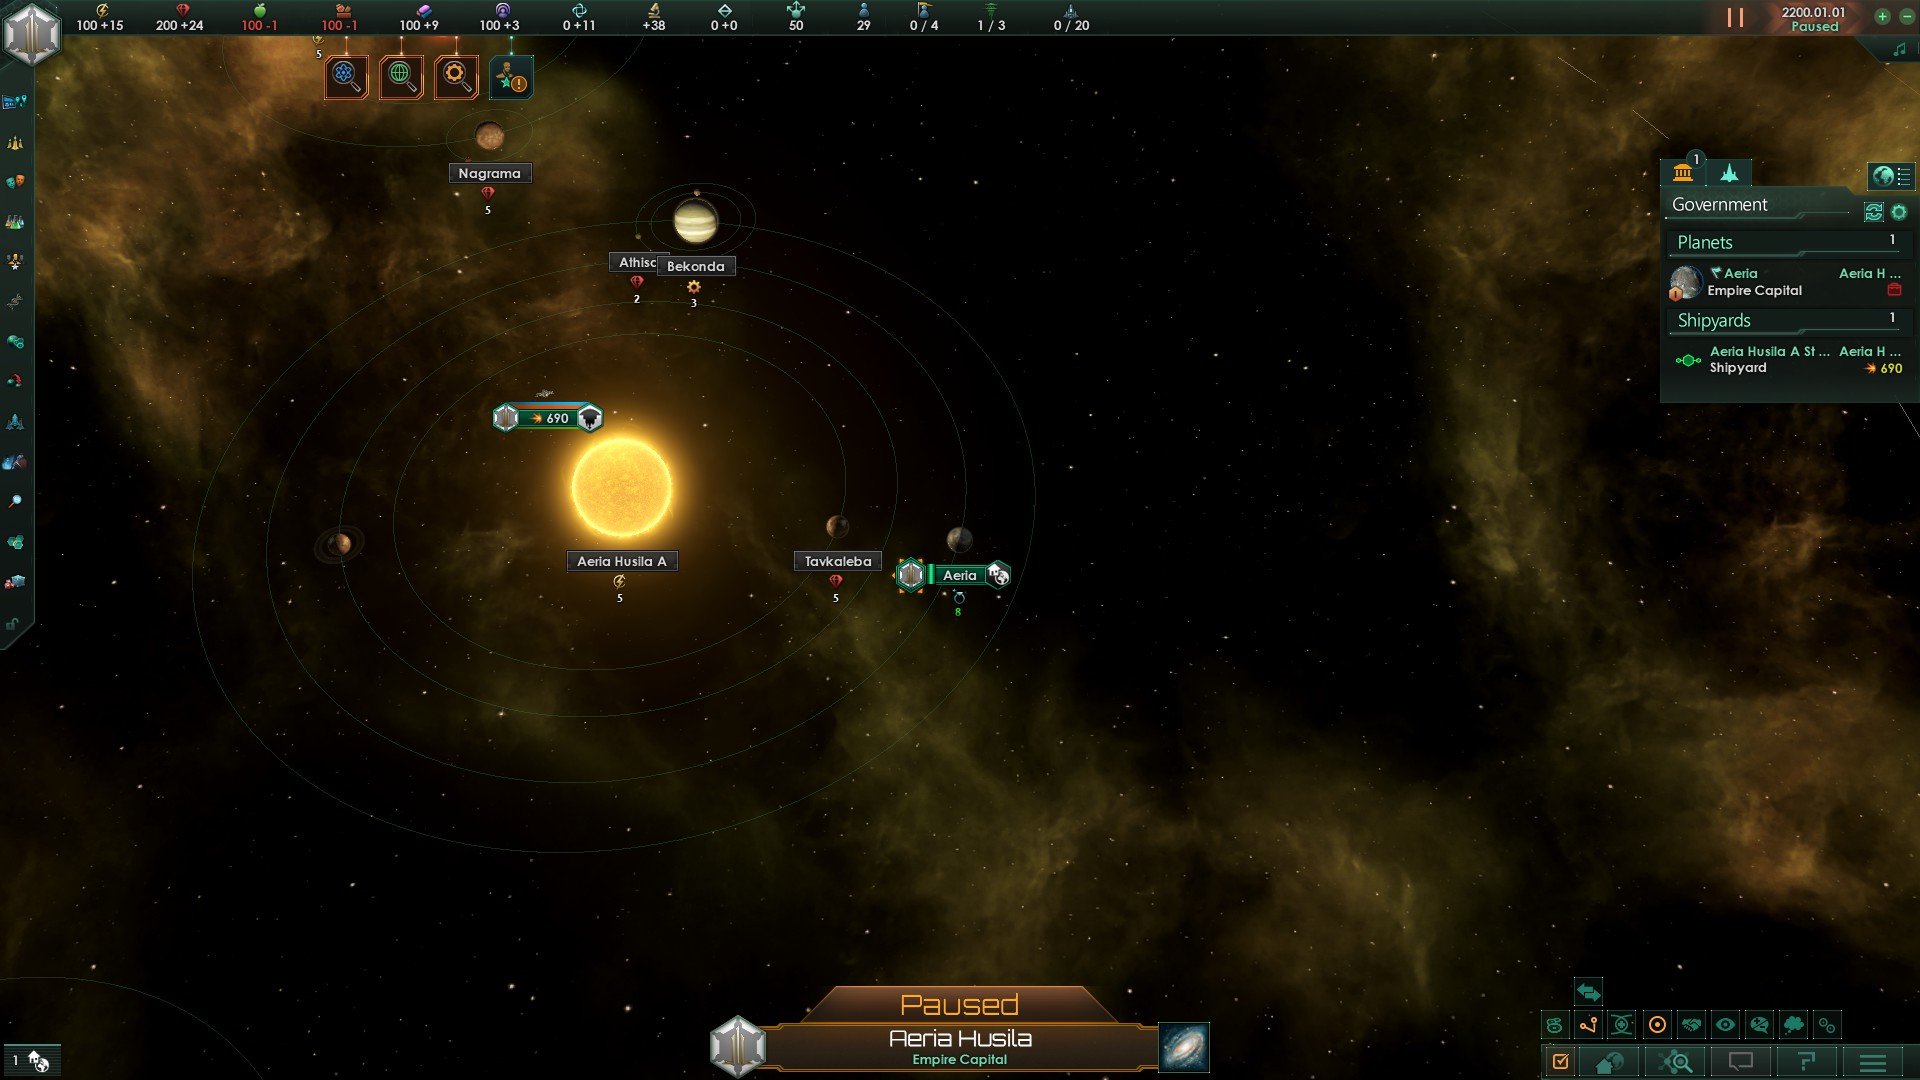 A screenshot of the main game screen. At the top is an info bar with the current amount of a number of resources, ranging from energy over alloys to research, empire size and available fleet capacity. On the left is a menubar granting access to additional screens like government, traditions or diplomacy. On the right side of the screen is a docket with the list of planets and shipyards. The main viewport shows a star system with a yellow star and five planets, some of which have symbols for resources they provide under them. The star is orbited by a starbase.